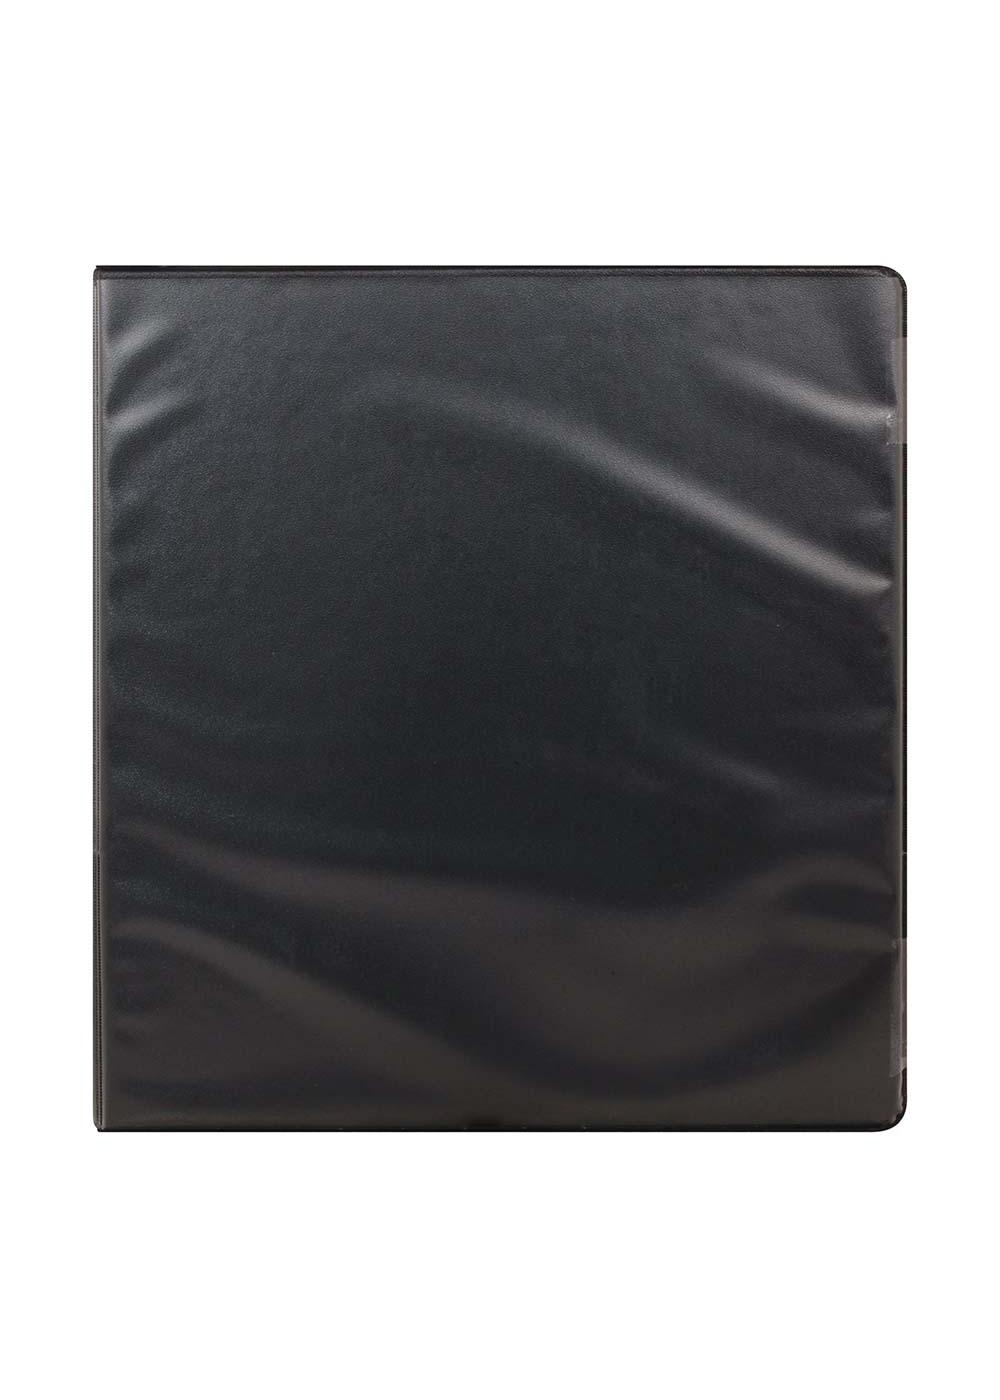 H-E-B D-Ring Durable View Binder - Black; image 2 of 2